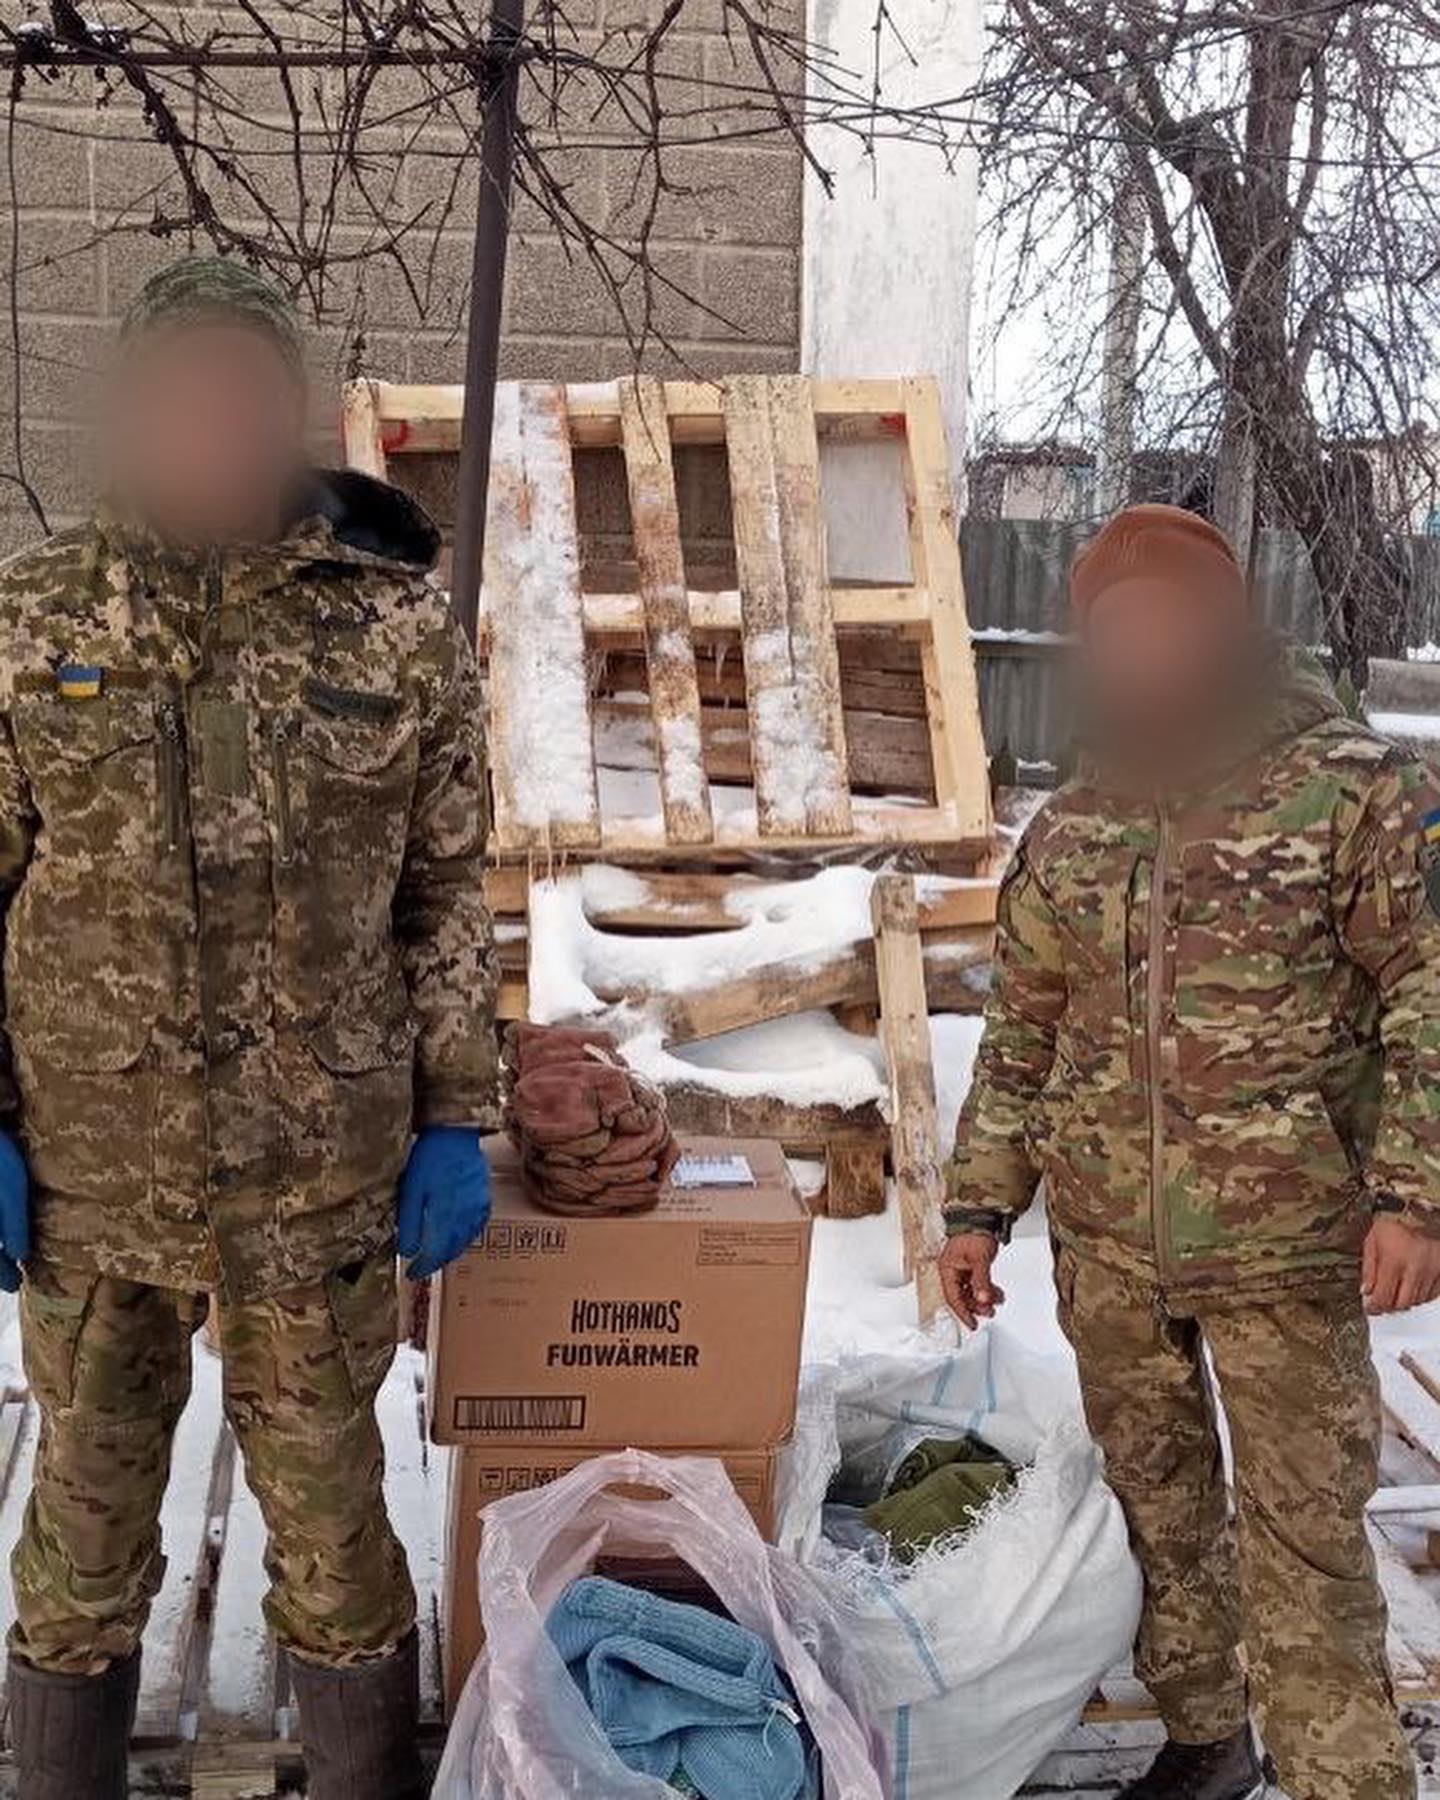 Two men in military uniforms standing next to boxes.